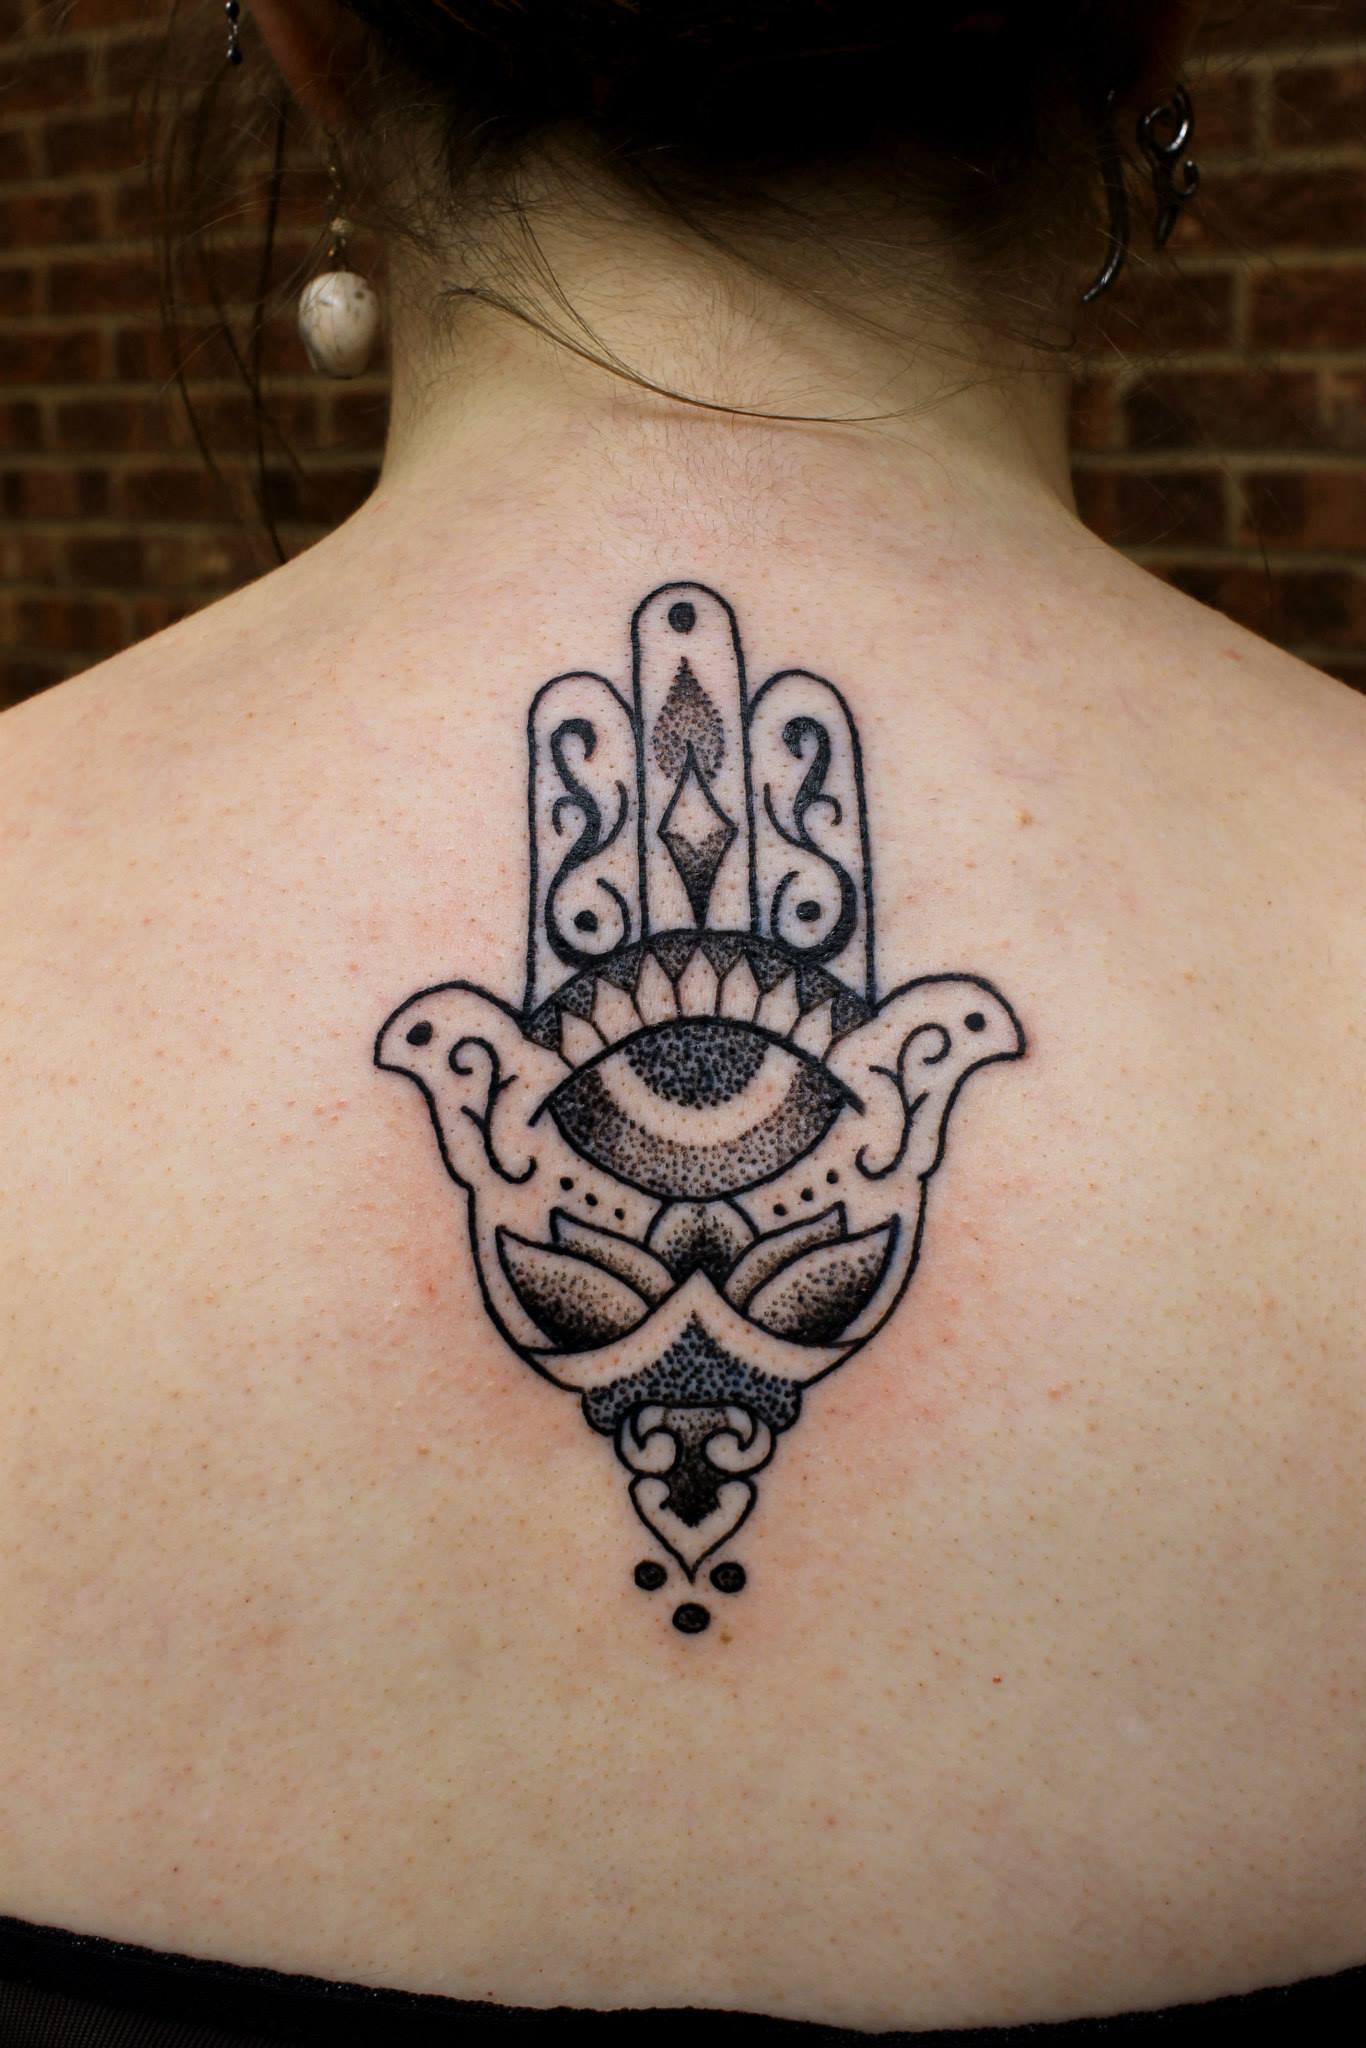 Hamsa Tattoos Designs, Ideas and Meaning | Tattoos For You